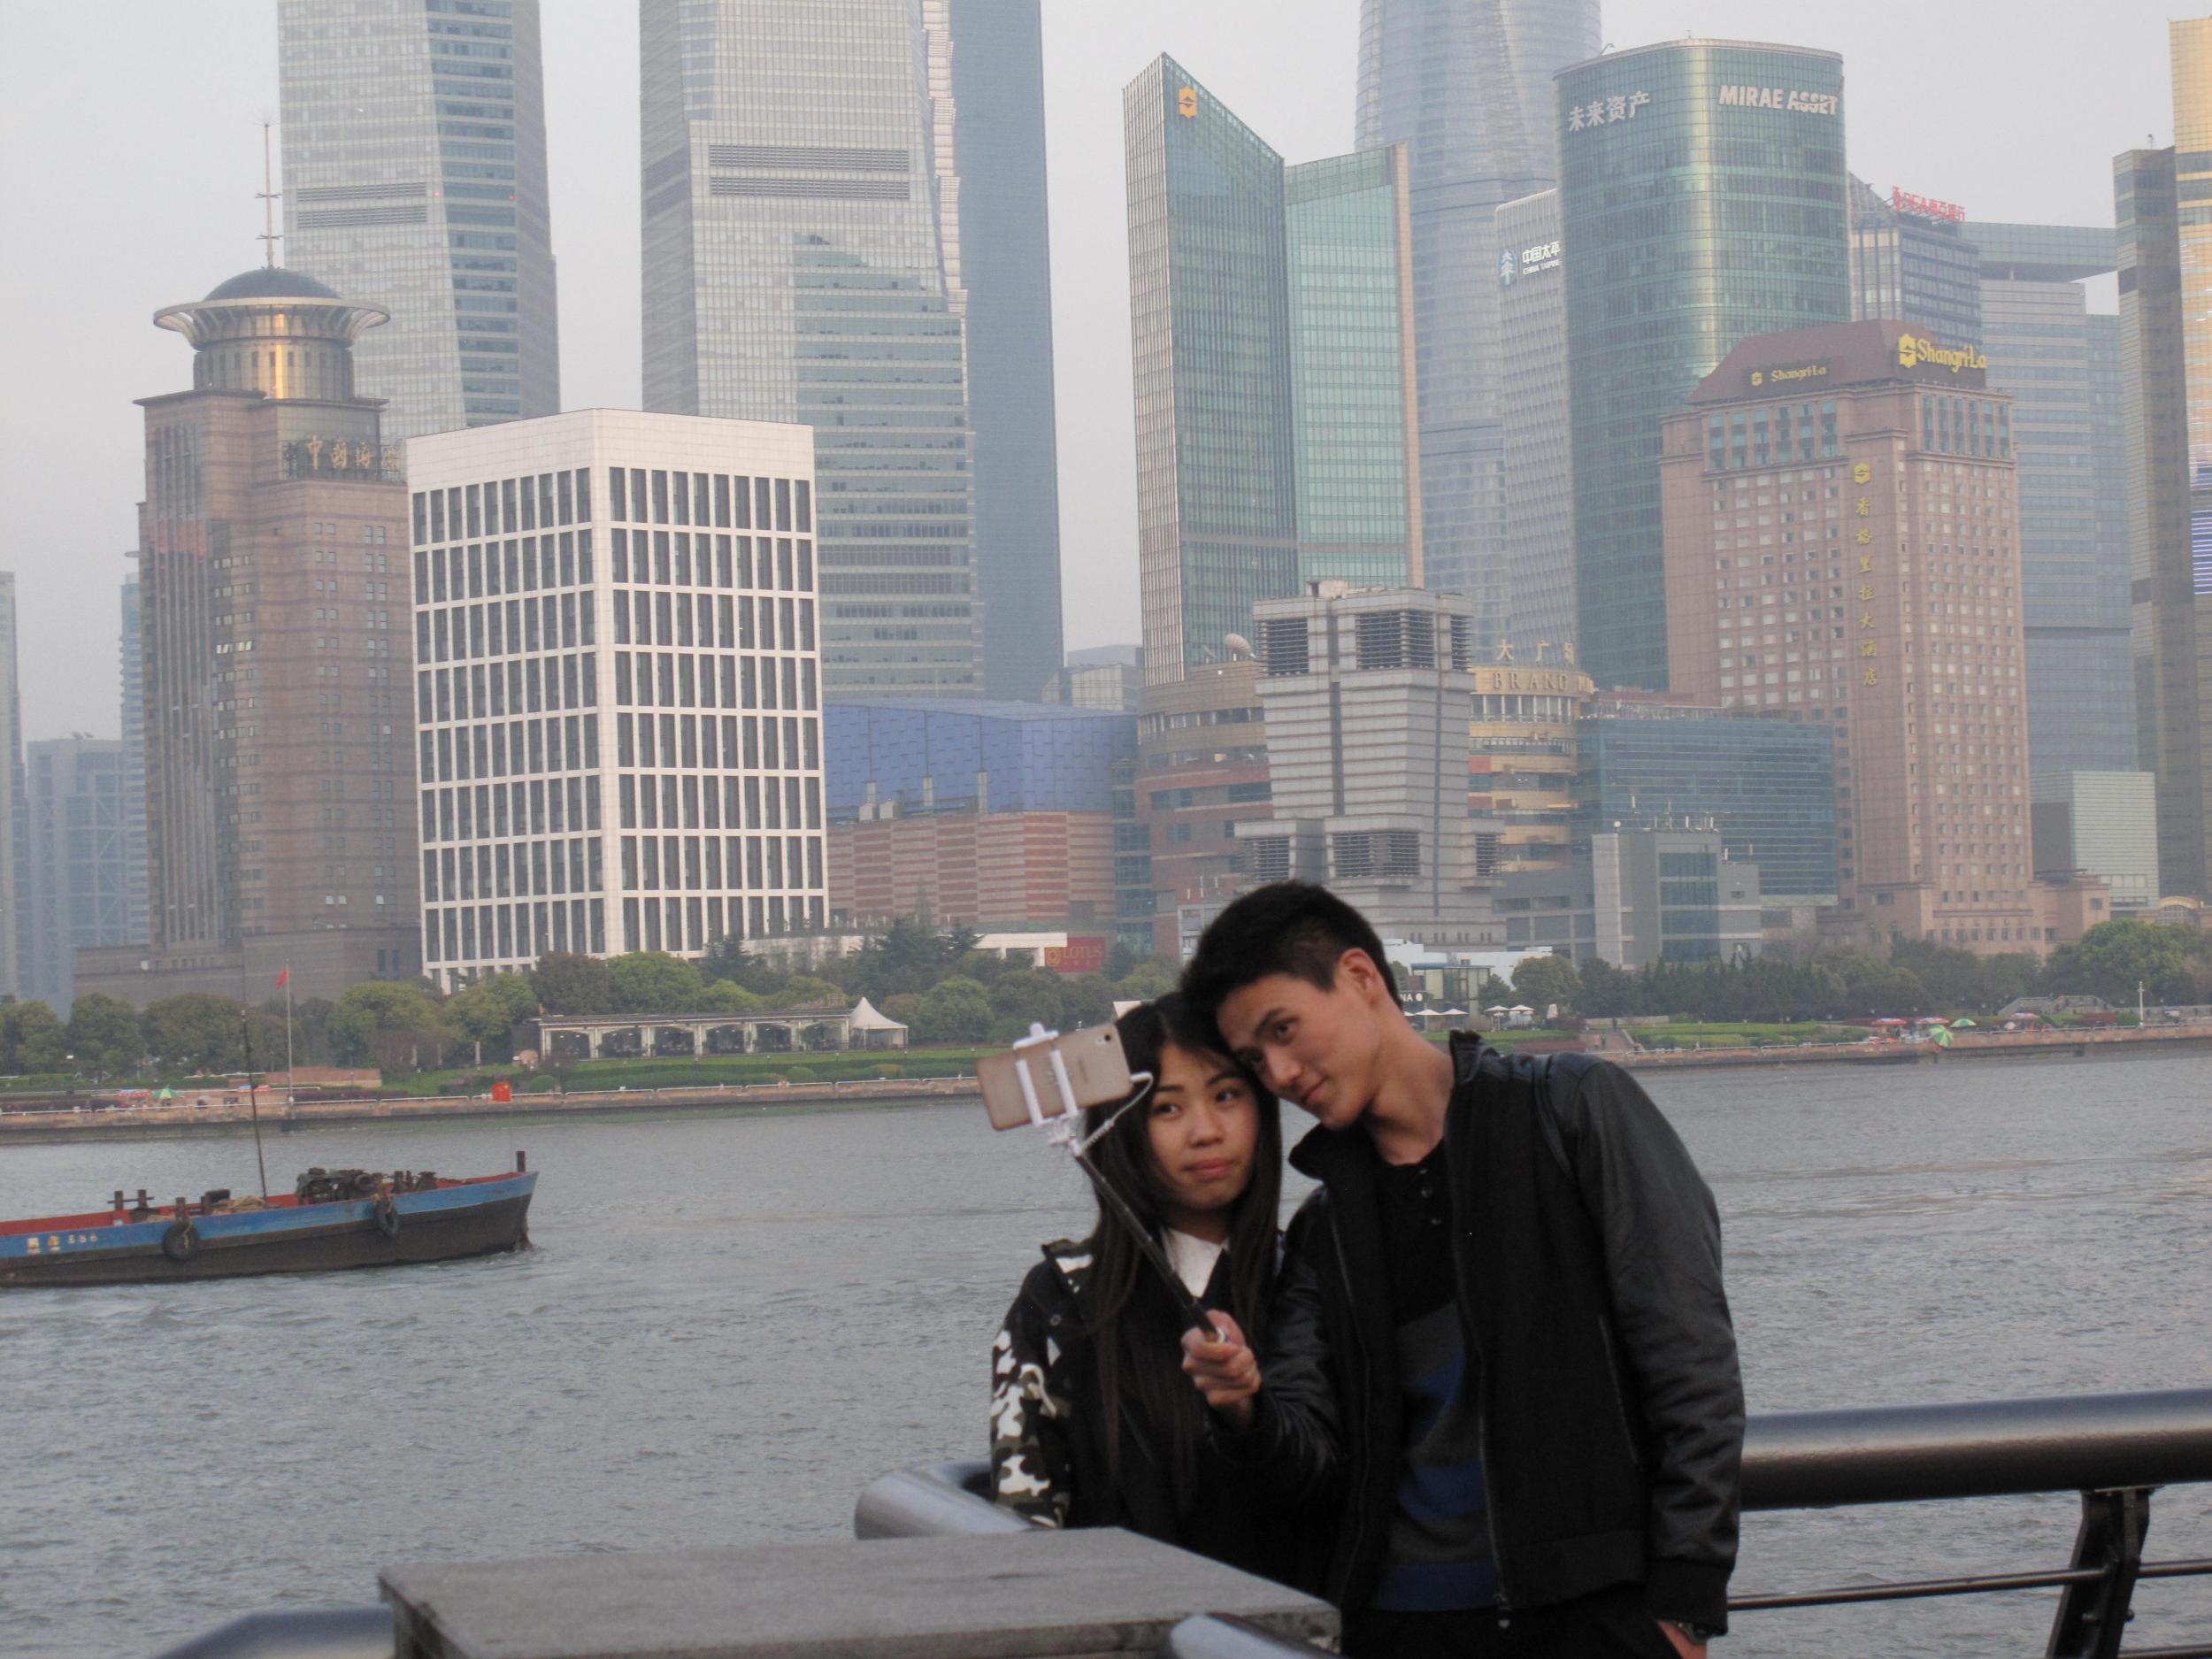 Worth the wait: the view from the Bund in Shanghai